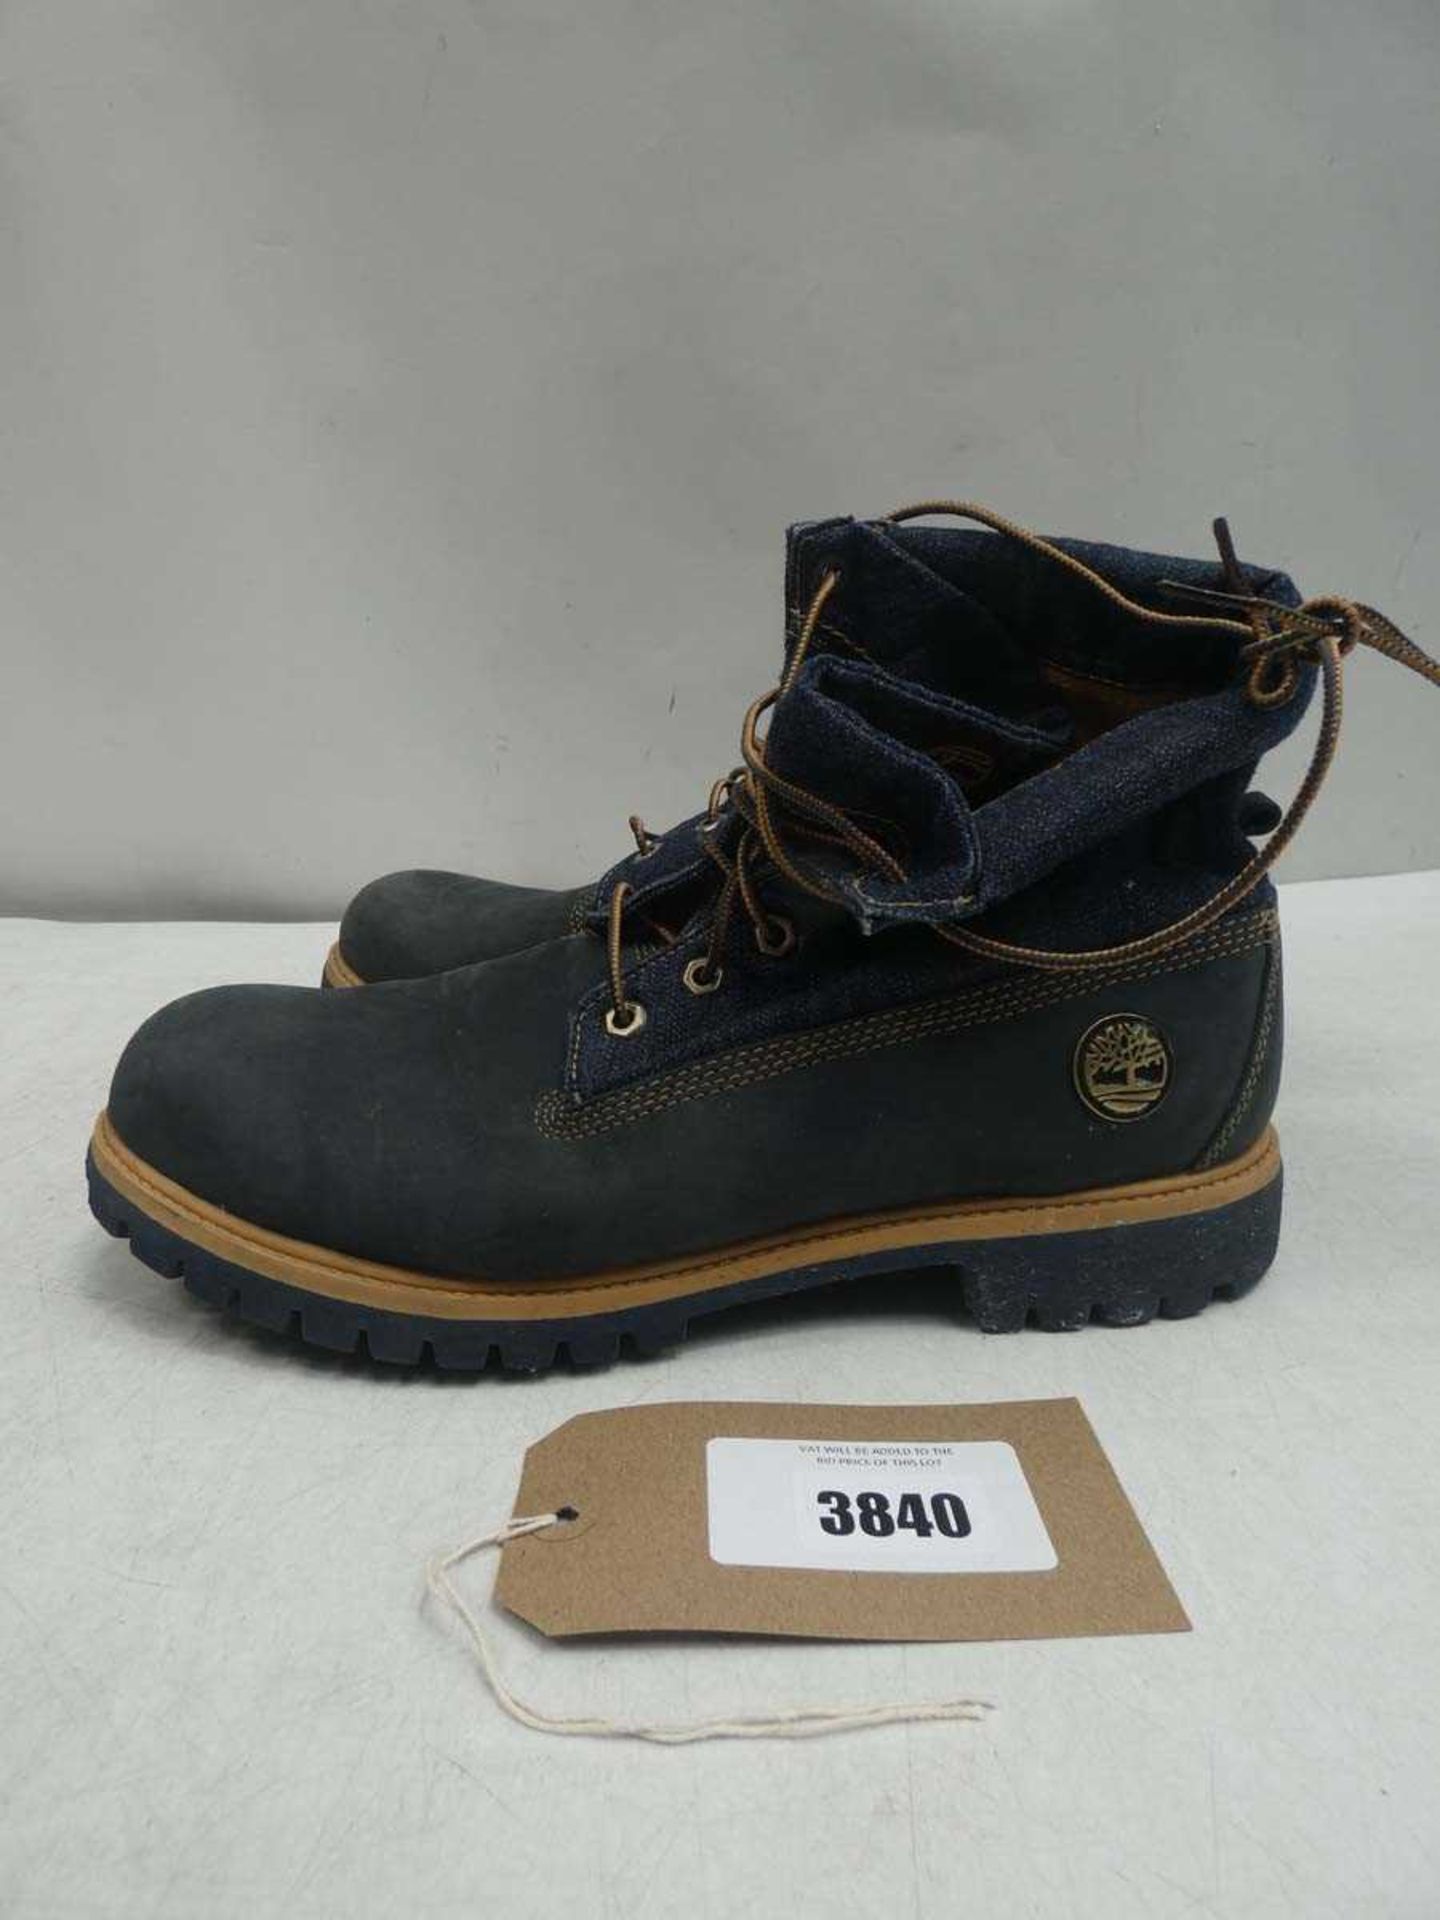 +VAT Timberland boots size 11 (used)